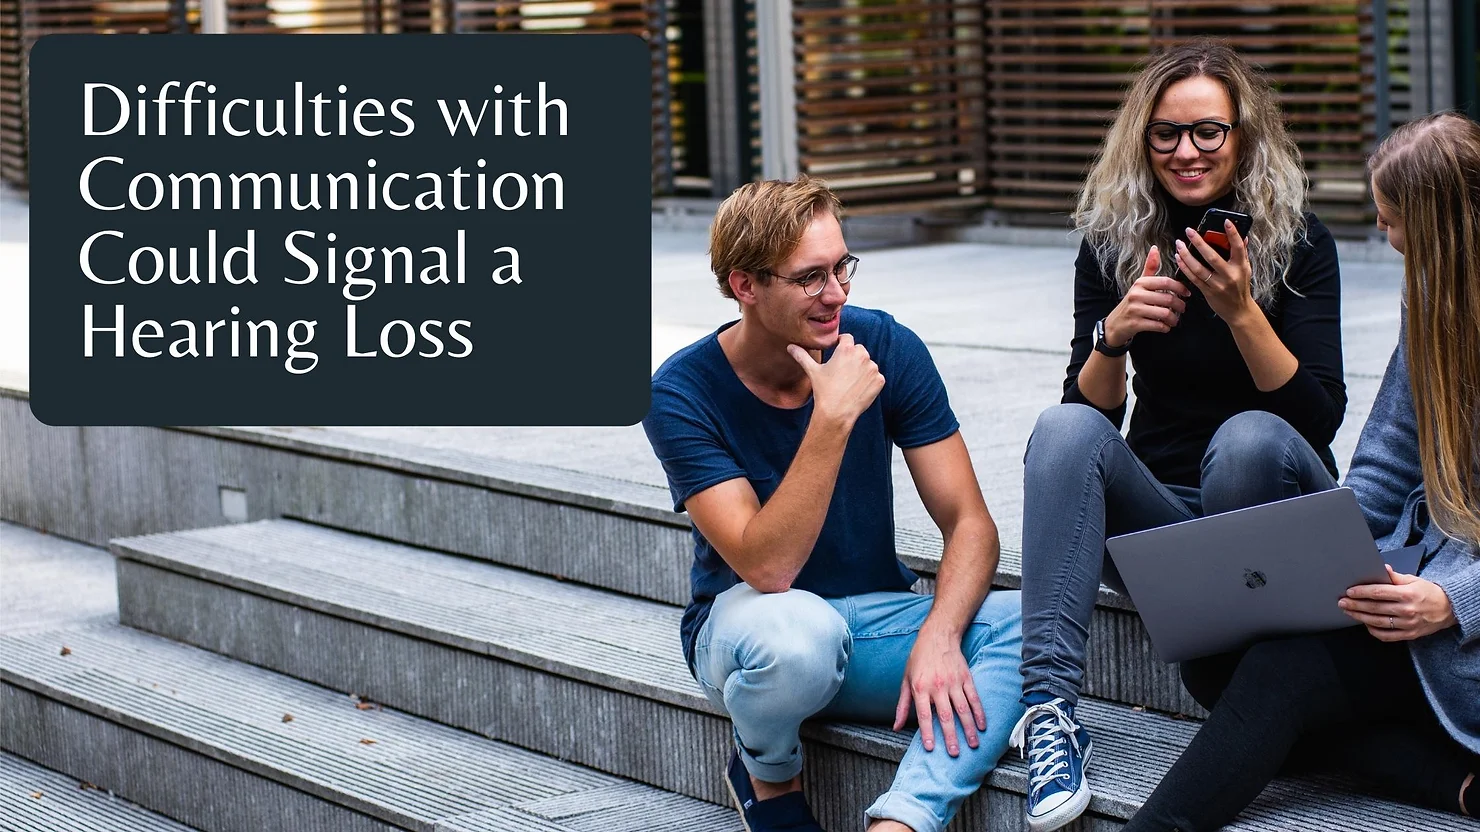 Featured image for “Difficulties with Communication Could Signal a Hearing Loss”